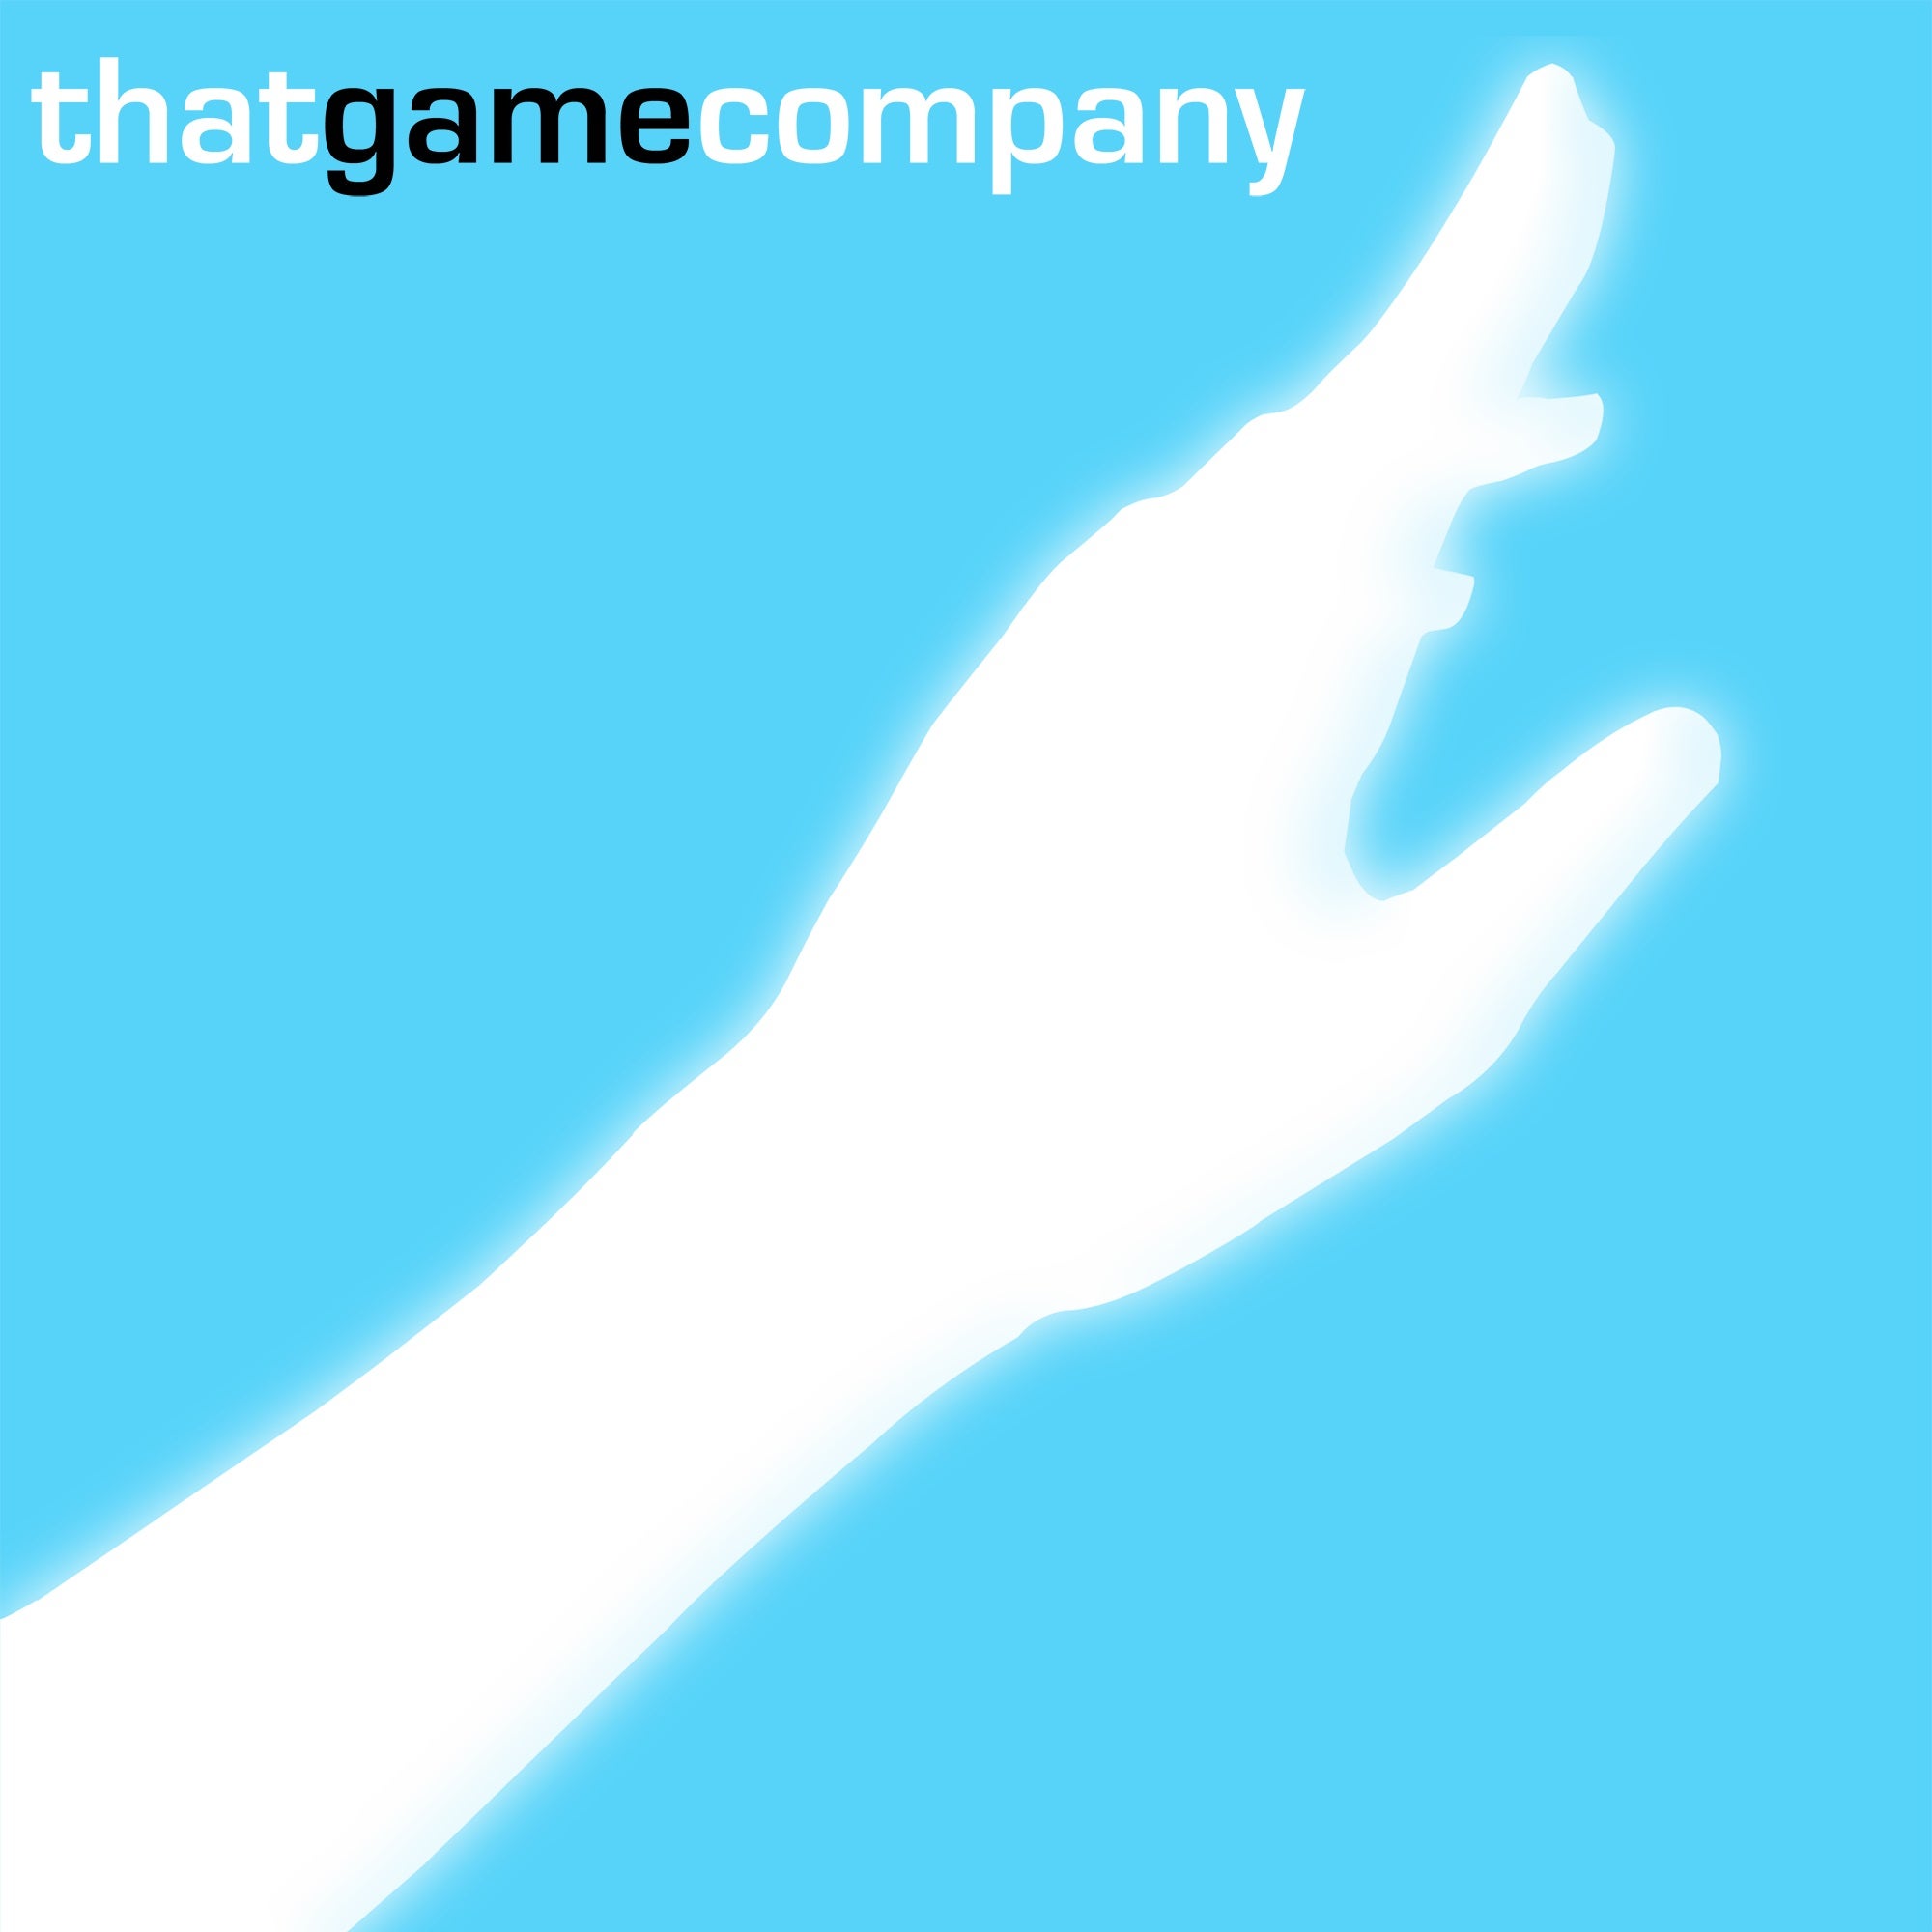 Image for Thatgamecompany receives $160m investment